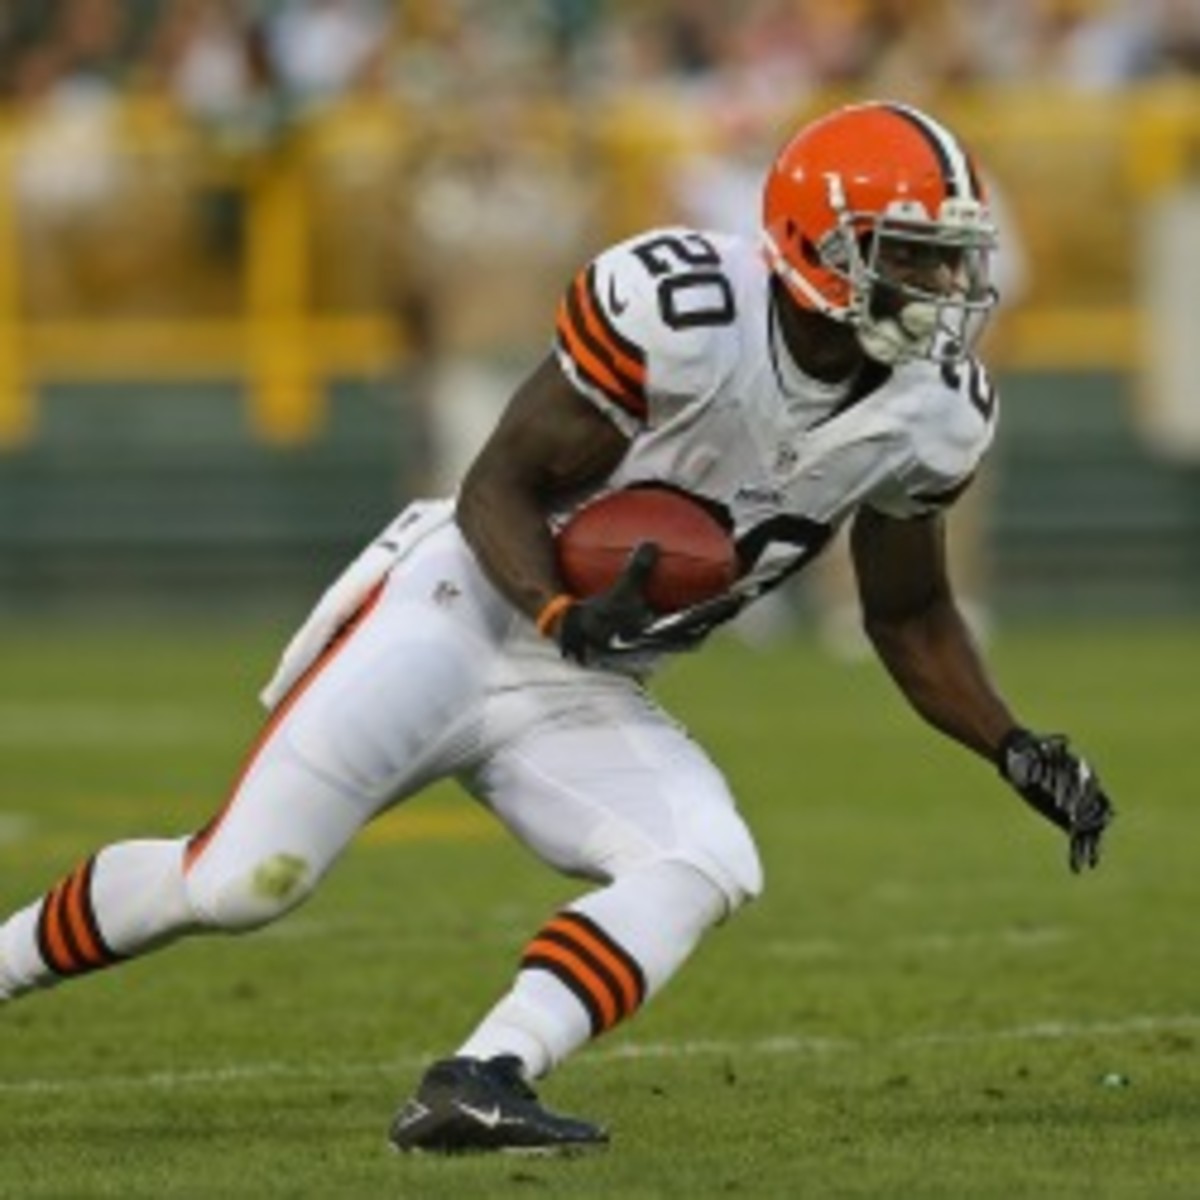 Browns running back Montario Hardesty will start in place of injured Trent Richardson. (Jonathan Daniel/Getty Images)